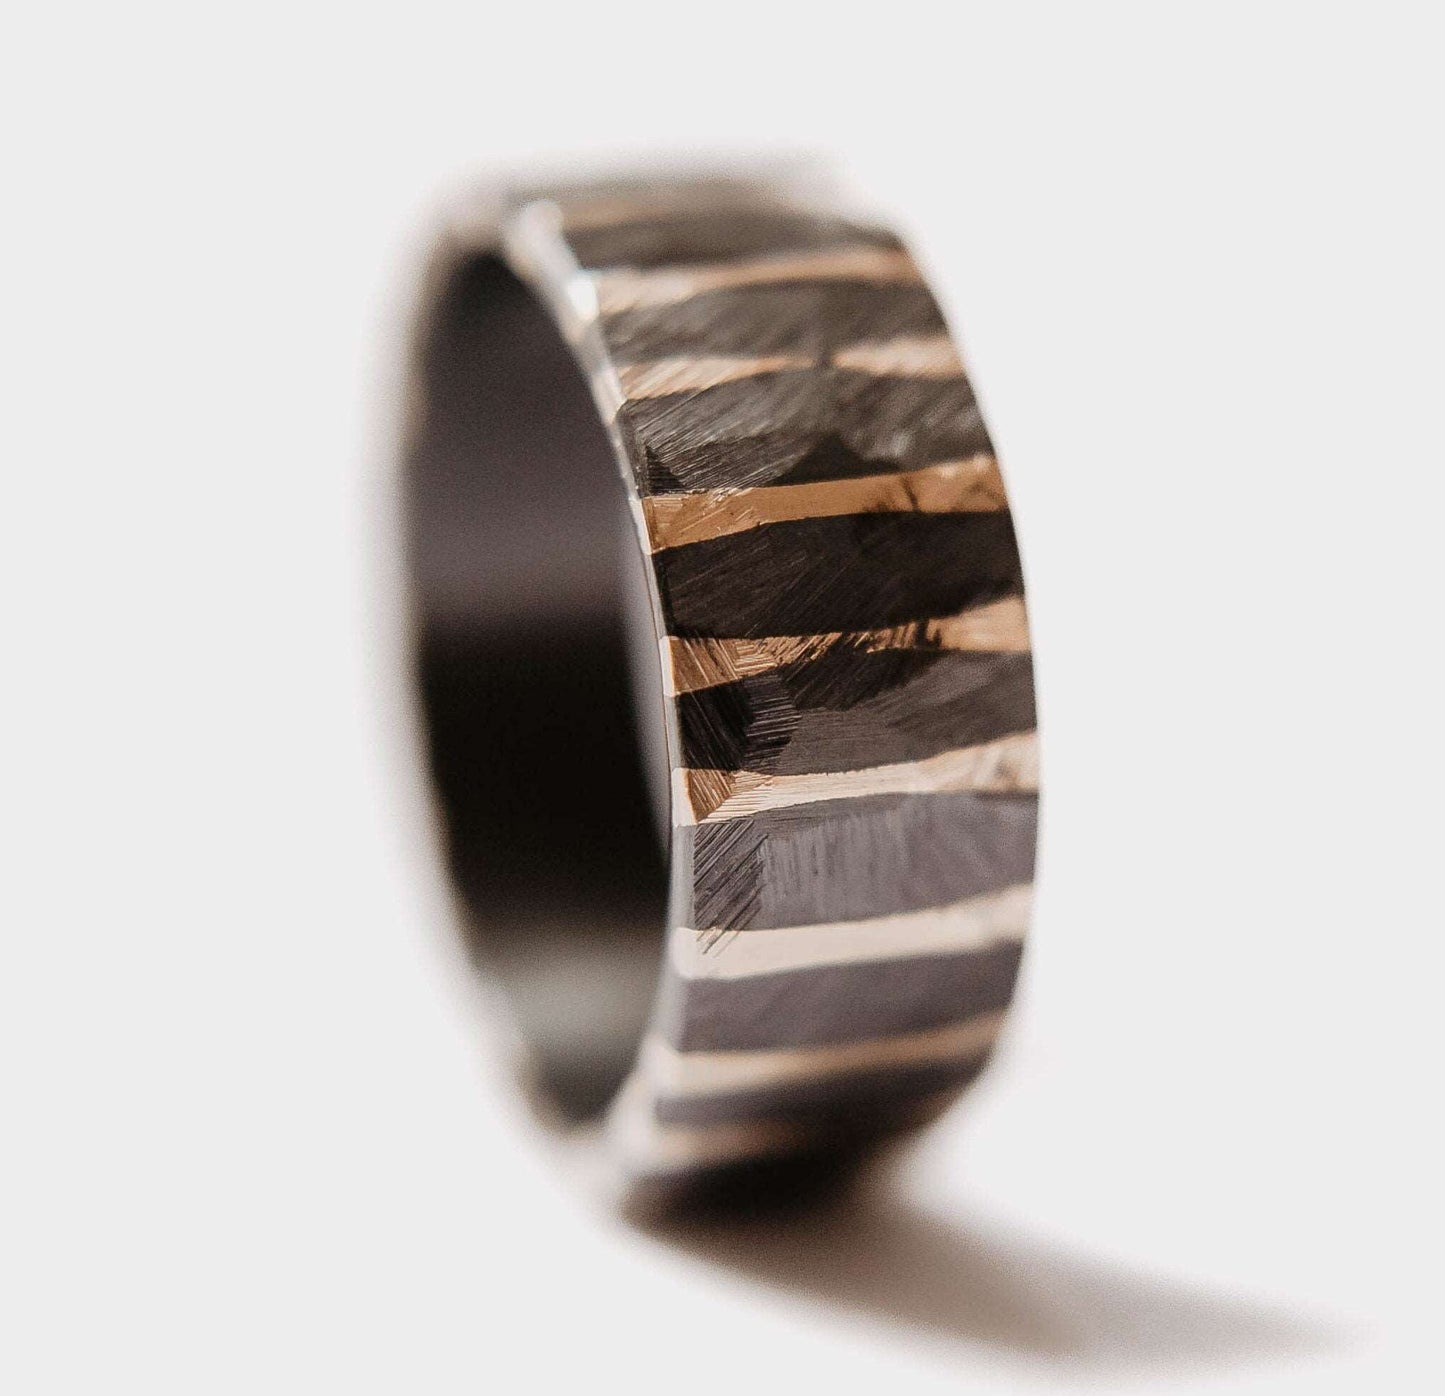 Gold Twilight Wedding Band. This photo shows a roughly faceted zirconium wedding band with 14k gold stripes (Vertical with white background)